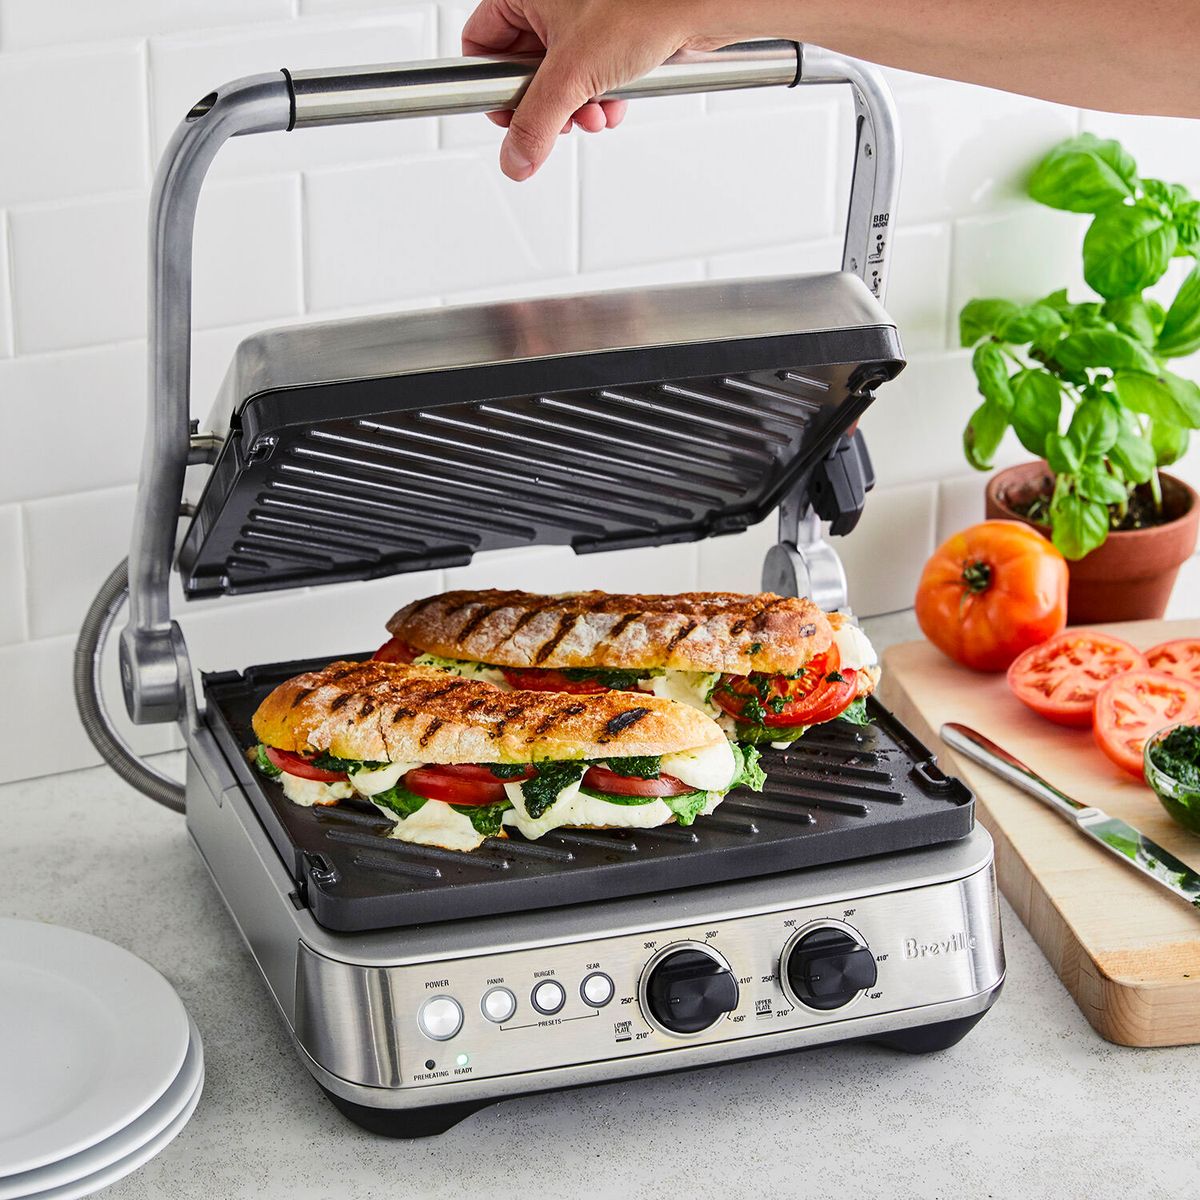 Grab the Cuisinart Griddler 3-in-1 Grill and Panini Press now